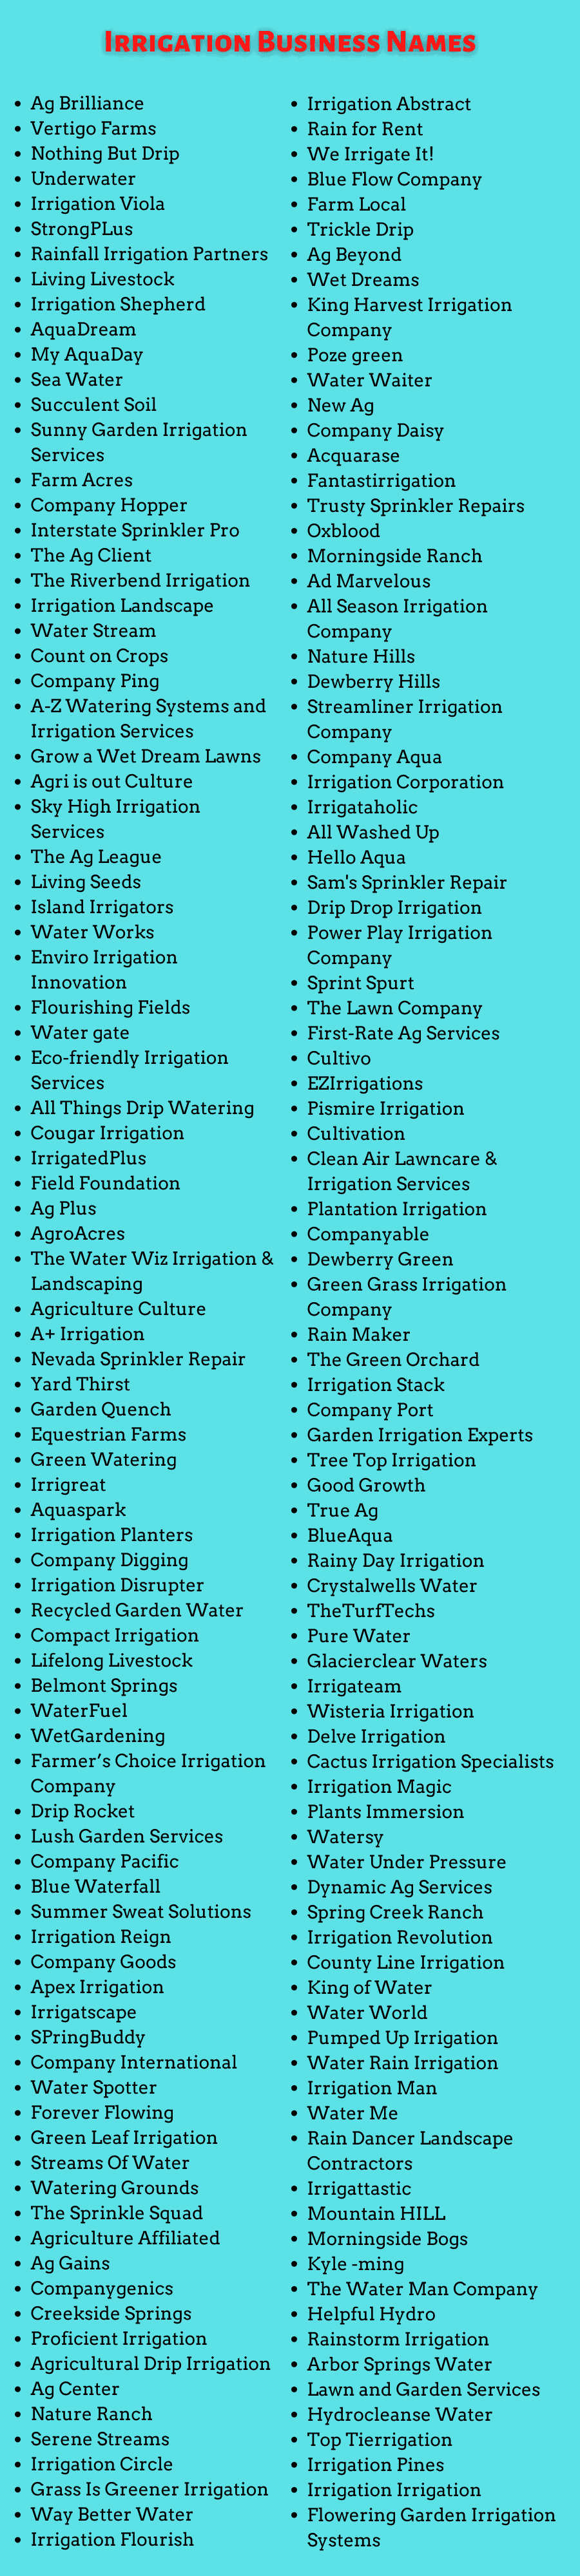 Irrigation Business Names